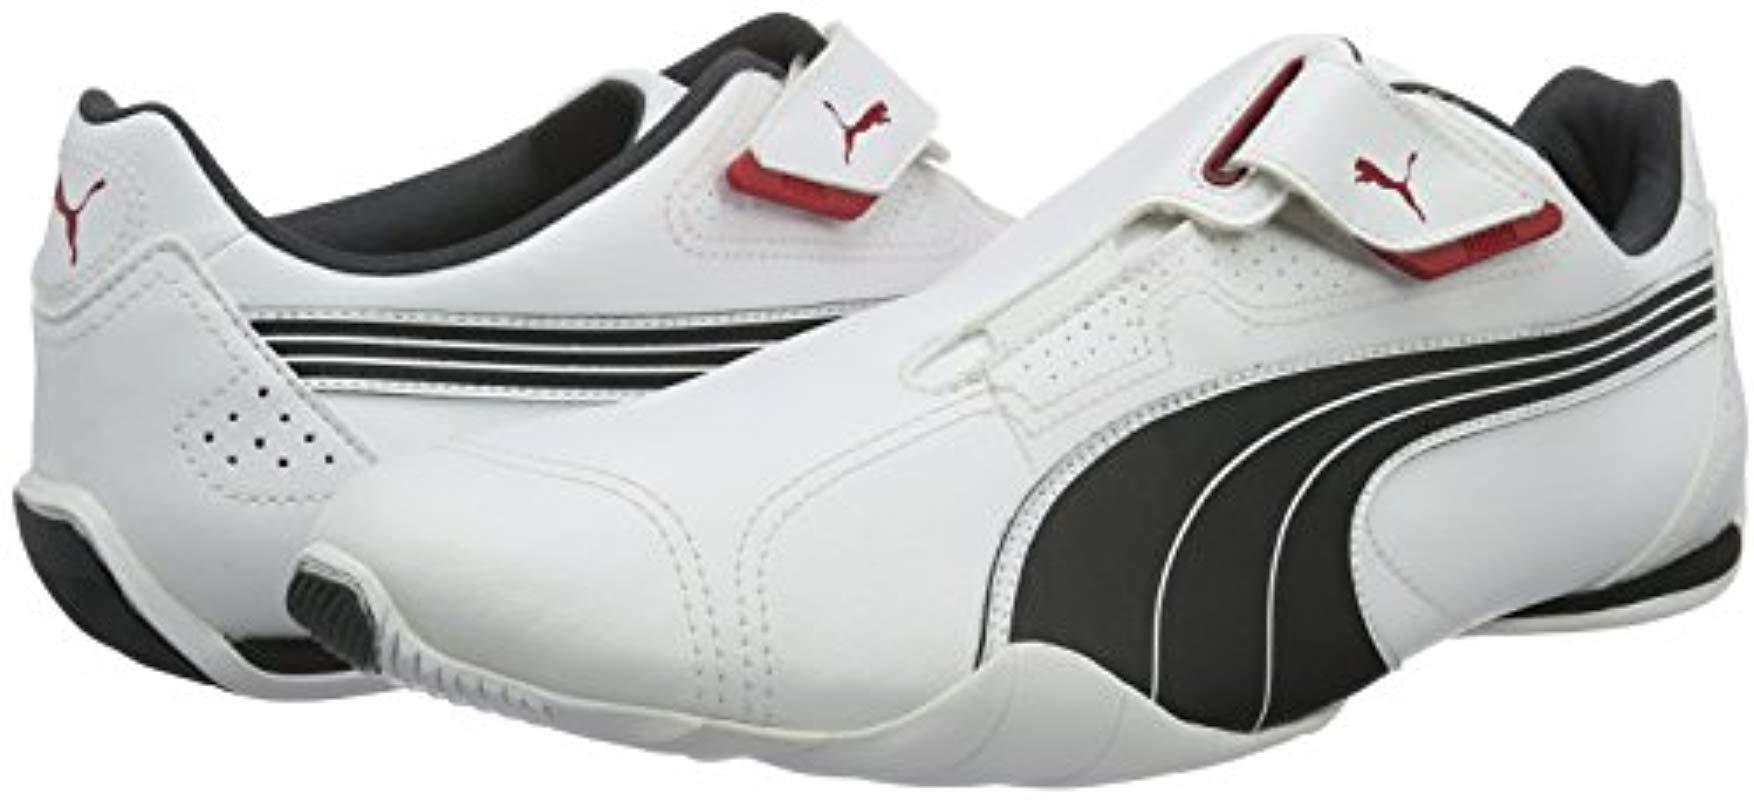 PUMA Synthetic Unisex Adults' Redon Move Trainers in White (White/Black ...